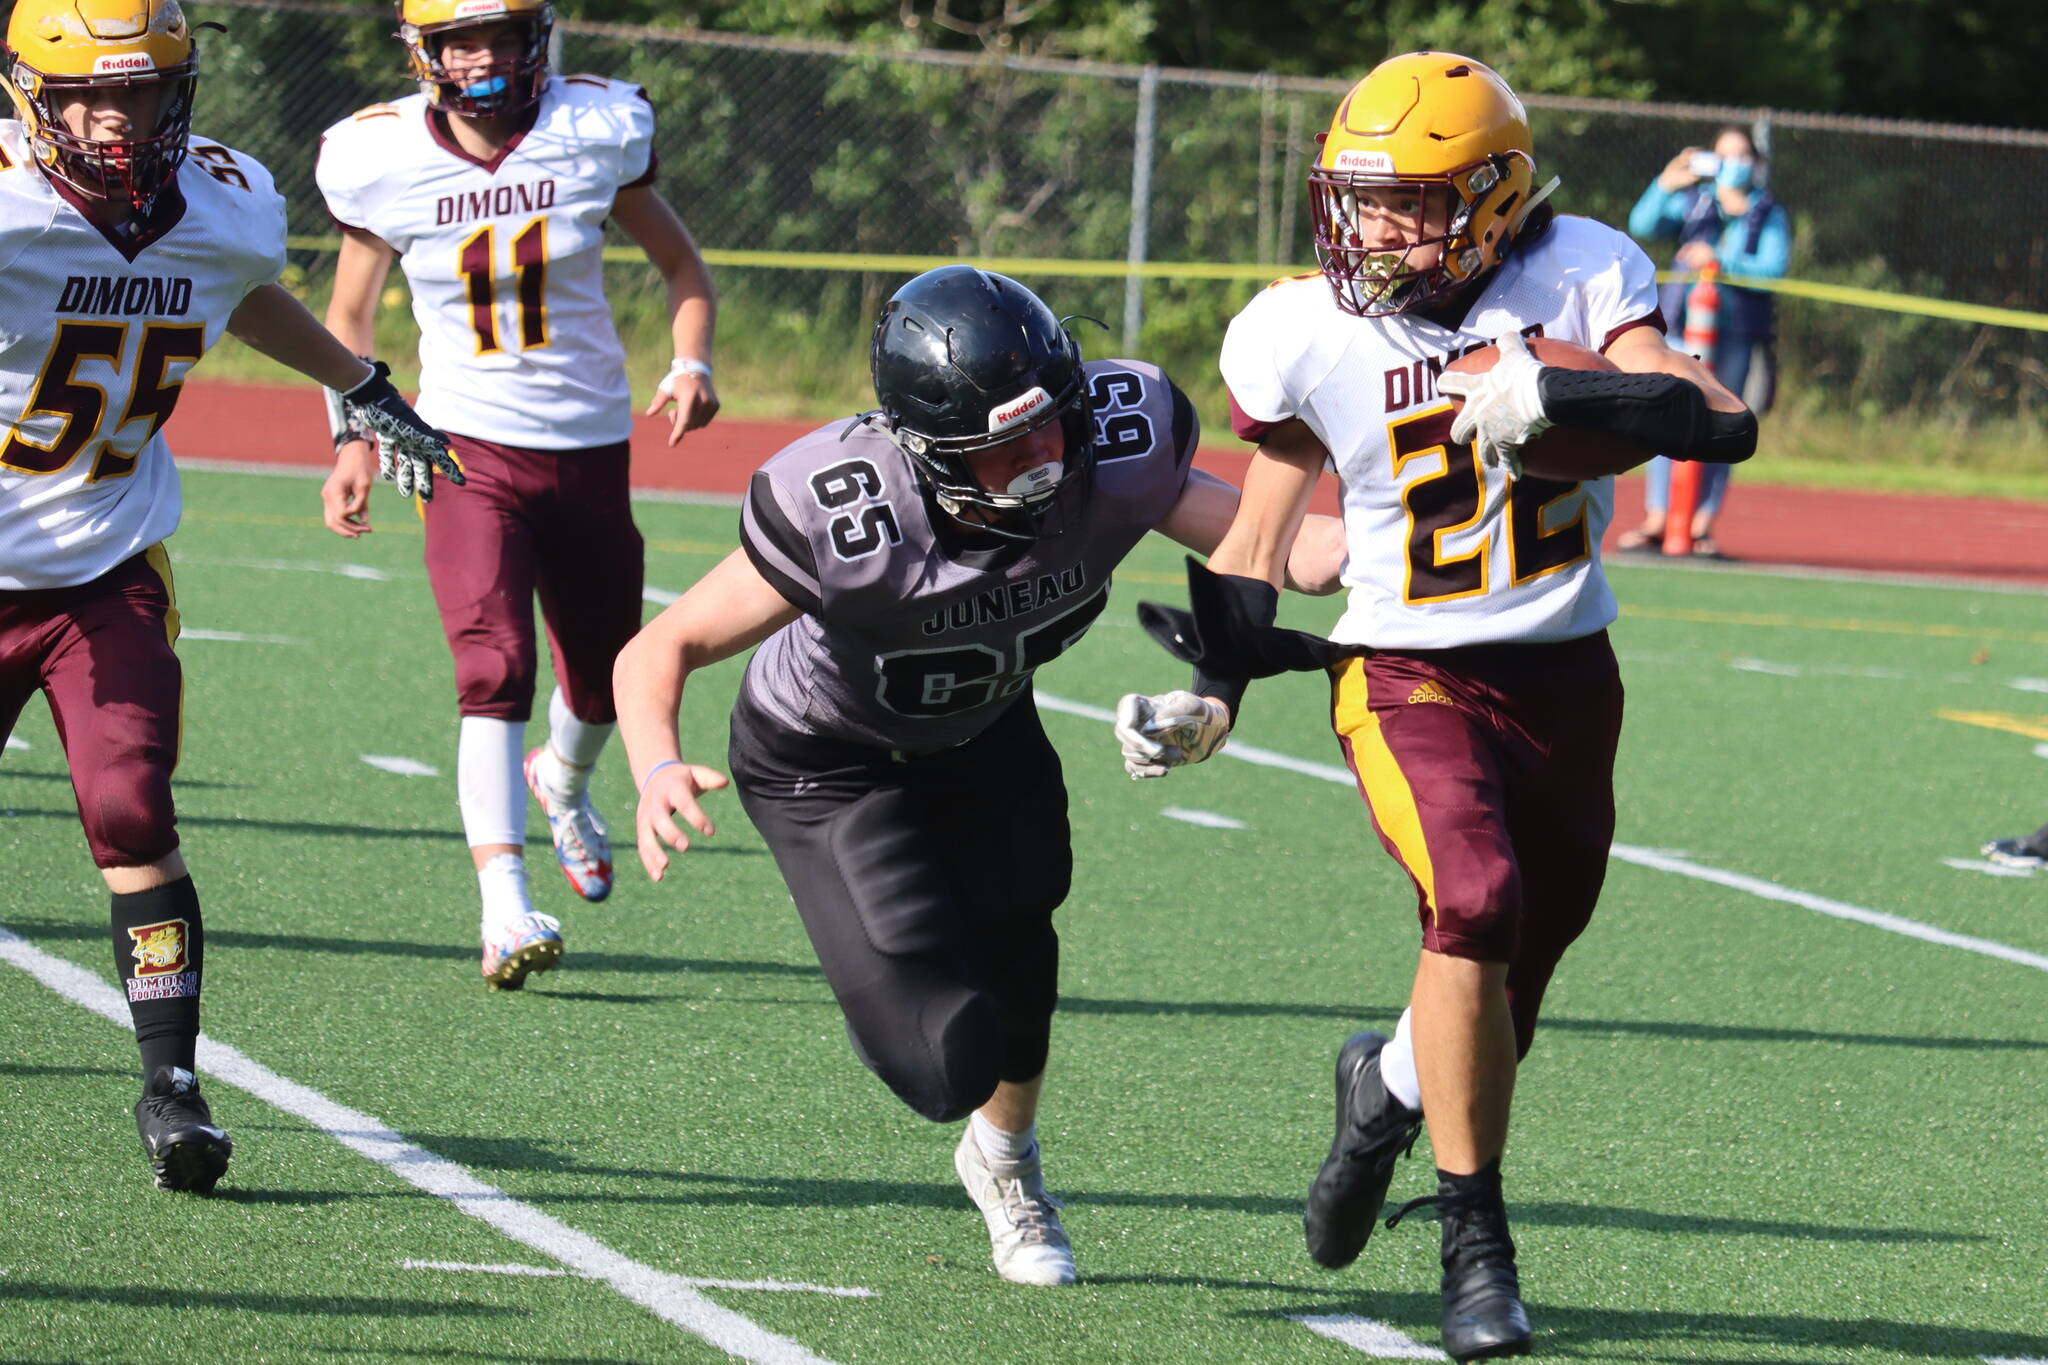 Brandon Campbell chases down a Dimond ball carrier during an Aug. 21 game. The Juneau Huskies and Dimond Lynx will face off again on Saturday. (Ben Hohenstatt / Juneau Empire File)